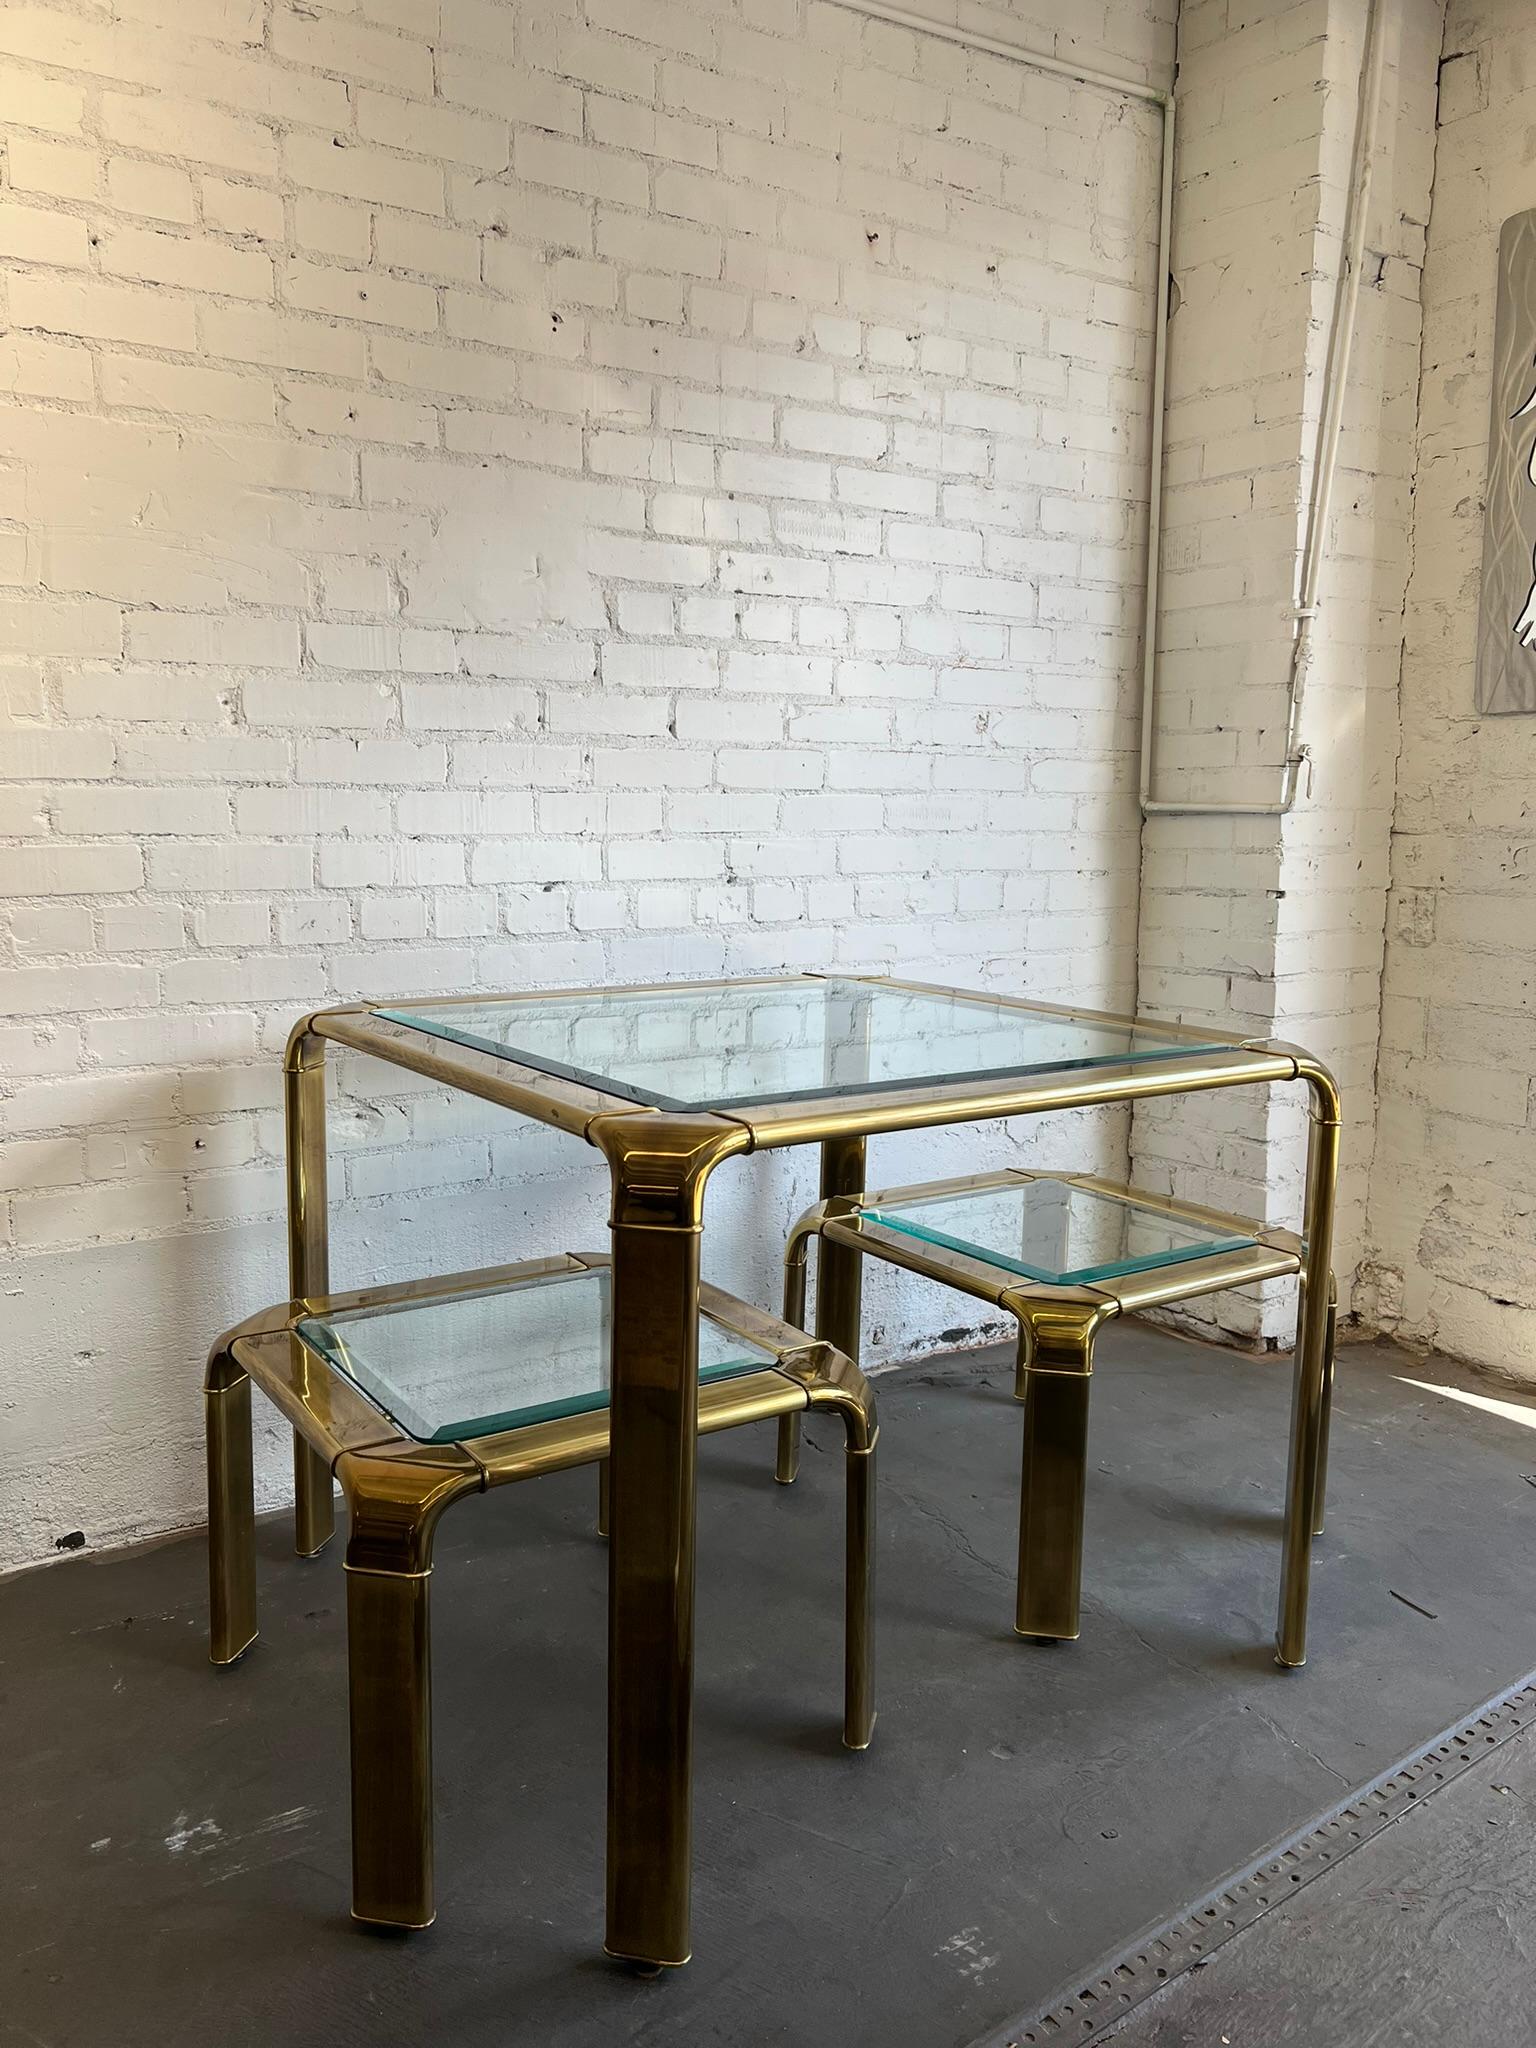 Beautifully designed 1980’s John Widdicomb brass waterfall dining table. Complete with an antiqued brass body and a thick beveled glass top.

Coffee tables, side, and consoles by Widdicomb in this style are available in the marketplace. However, the